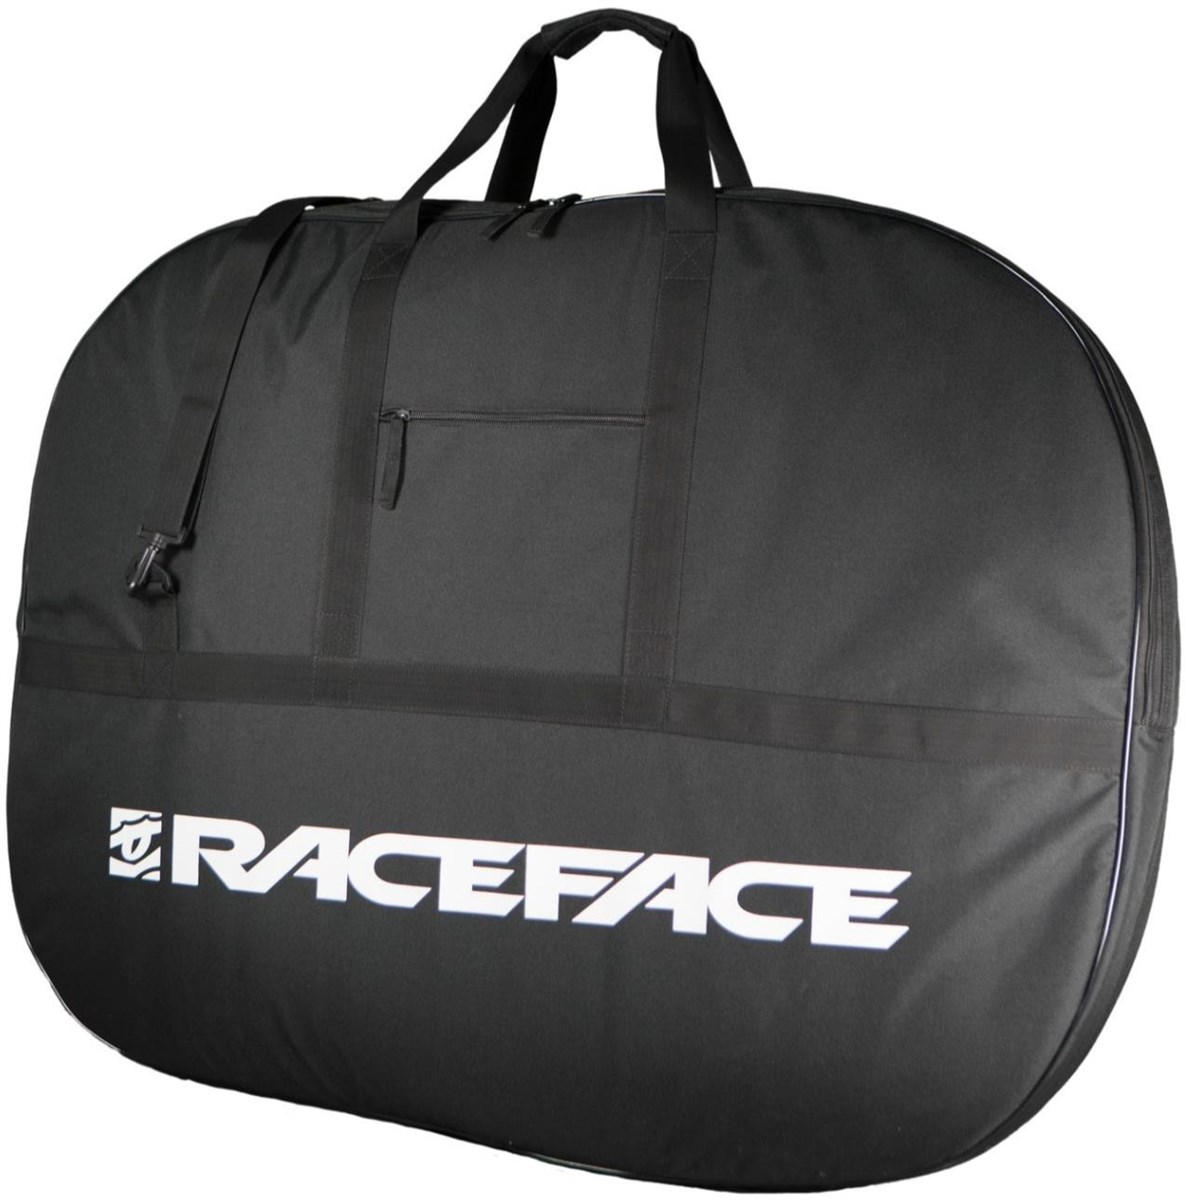 Race Face Double Wheel Bag product image